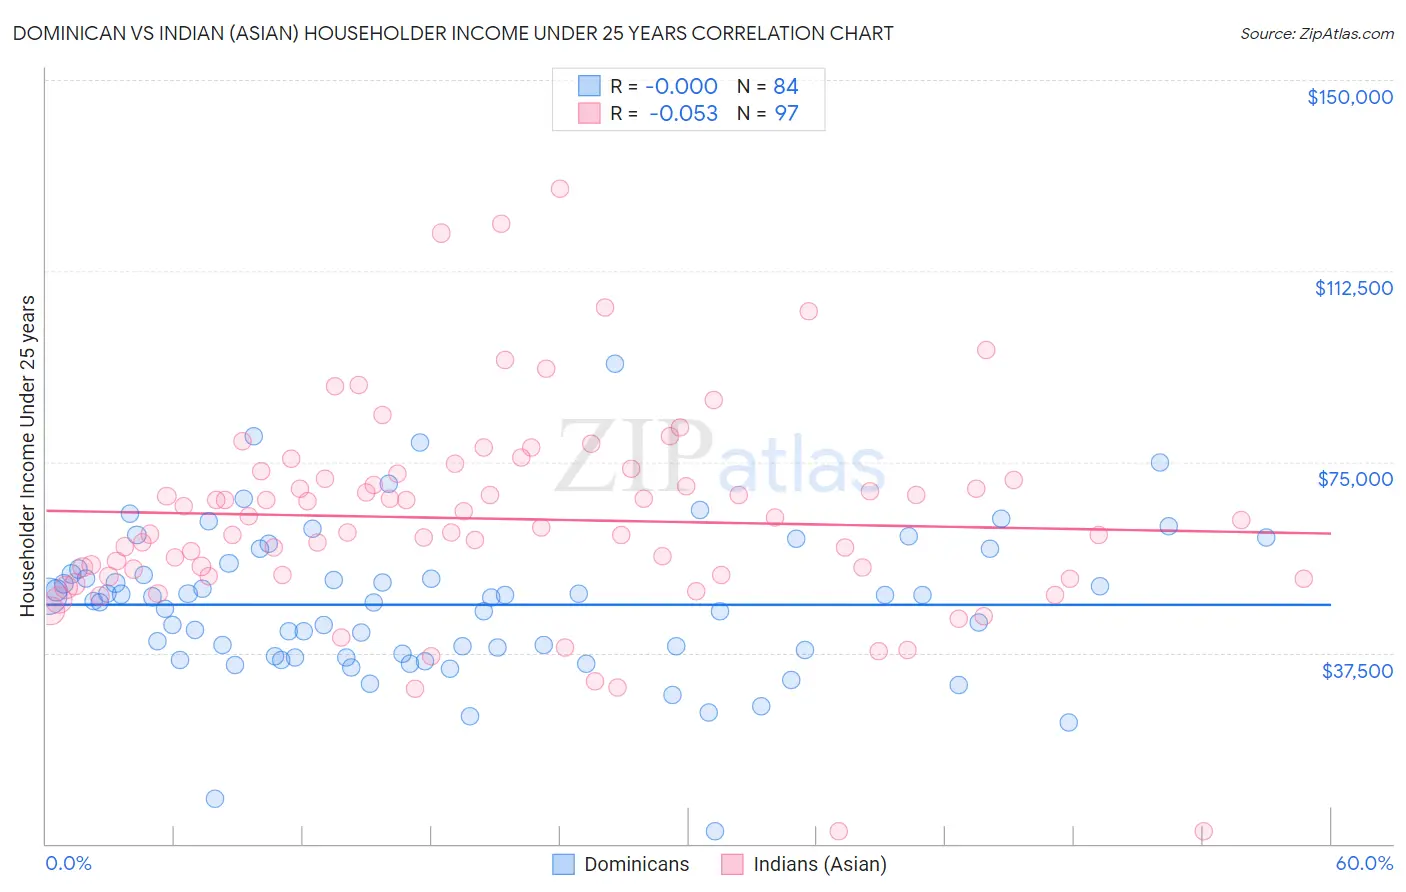 Dominican vs Indian (Asian) Householder Income Under 25 years